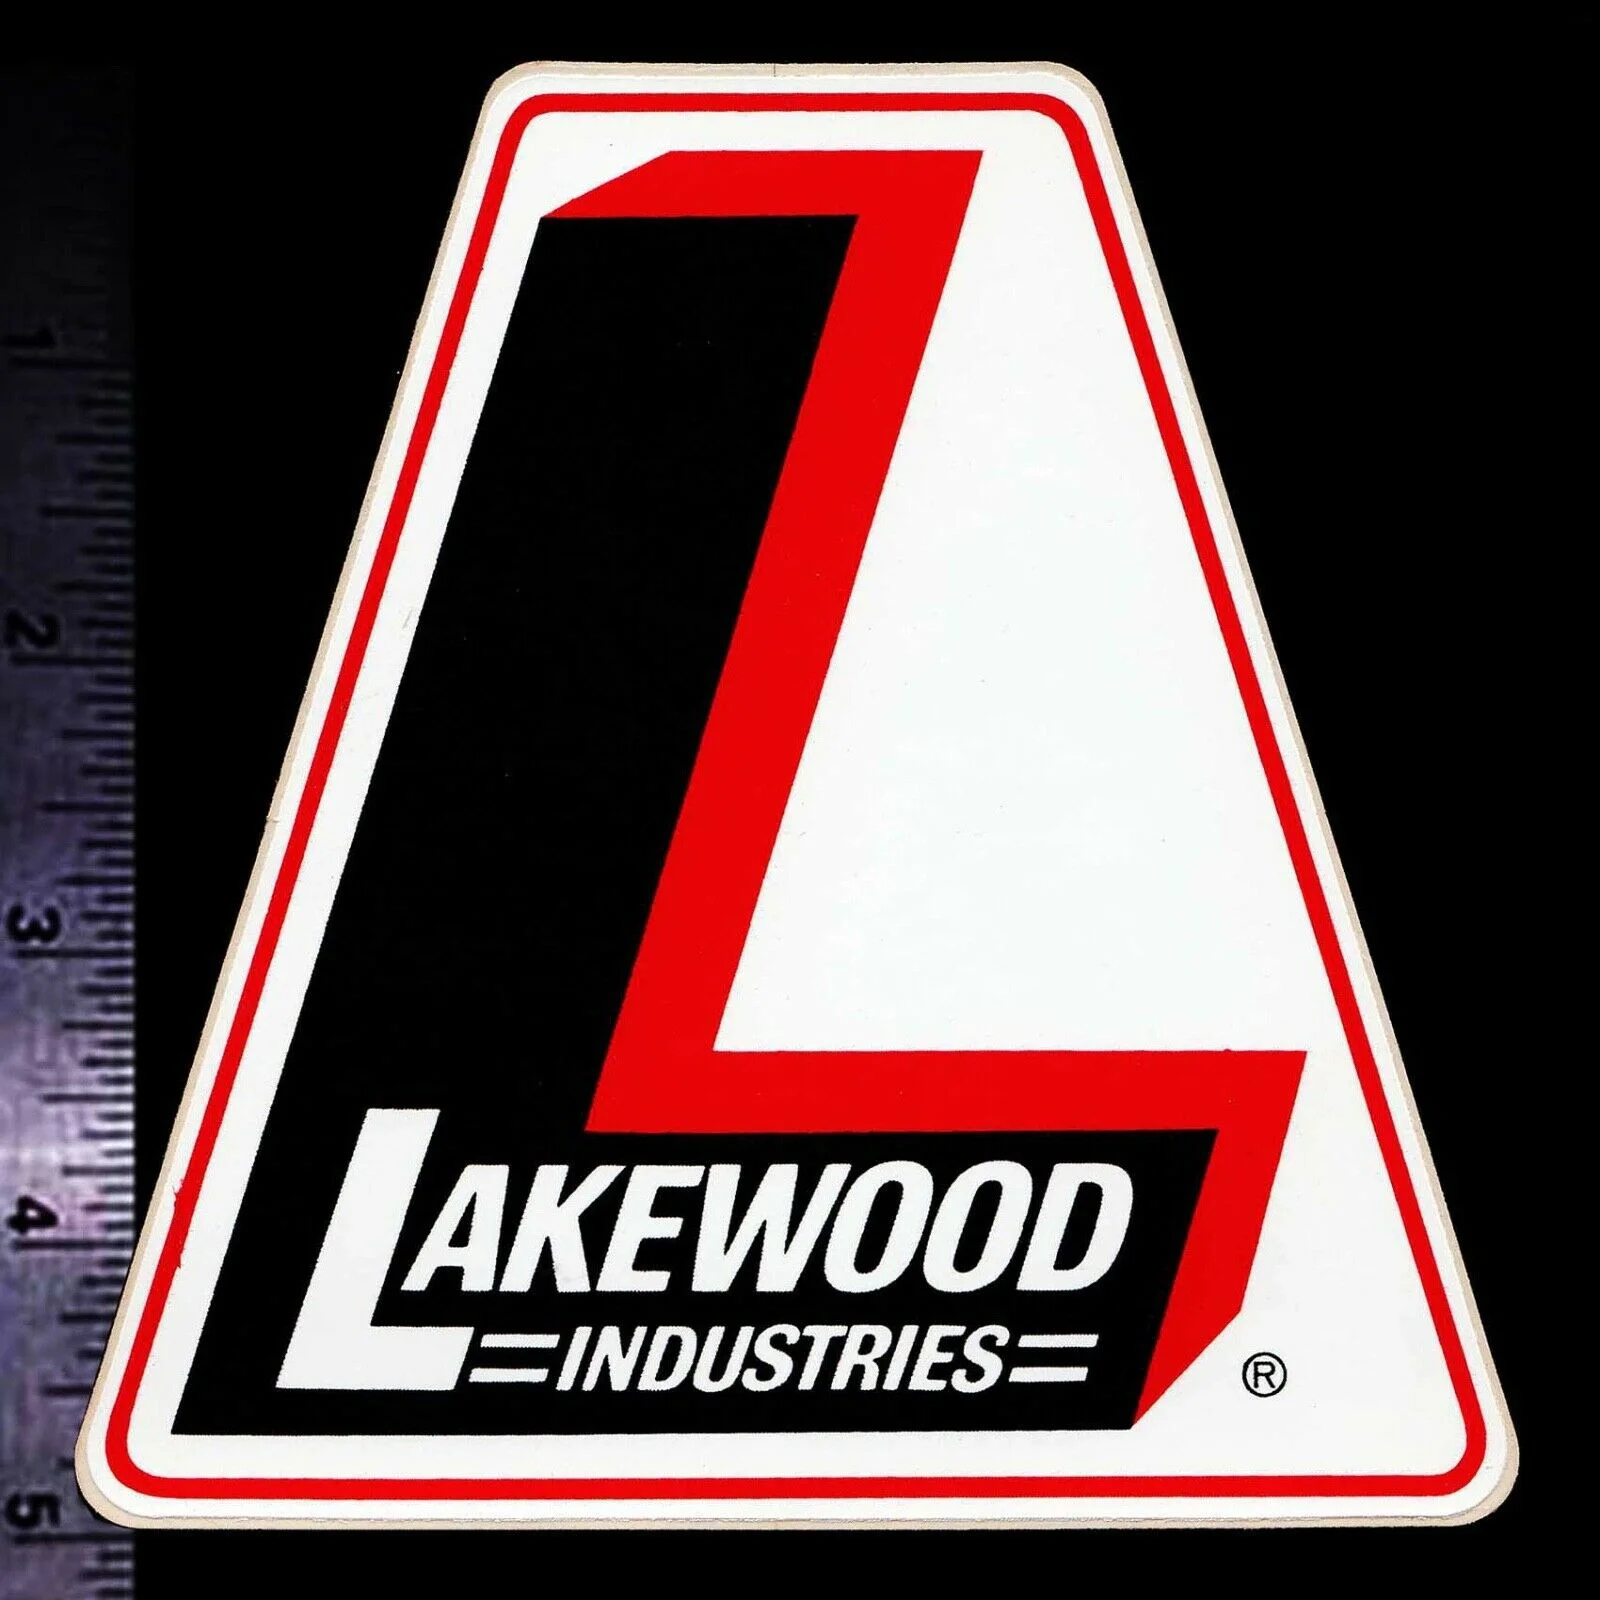 

For x2 LAKEWOOD Industries - Original Vintage 60's 70's Racing Decal/Sticker